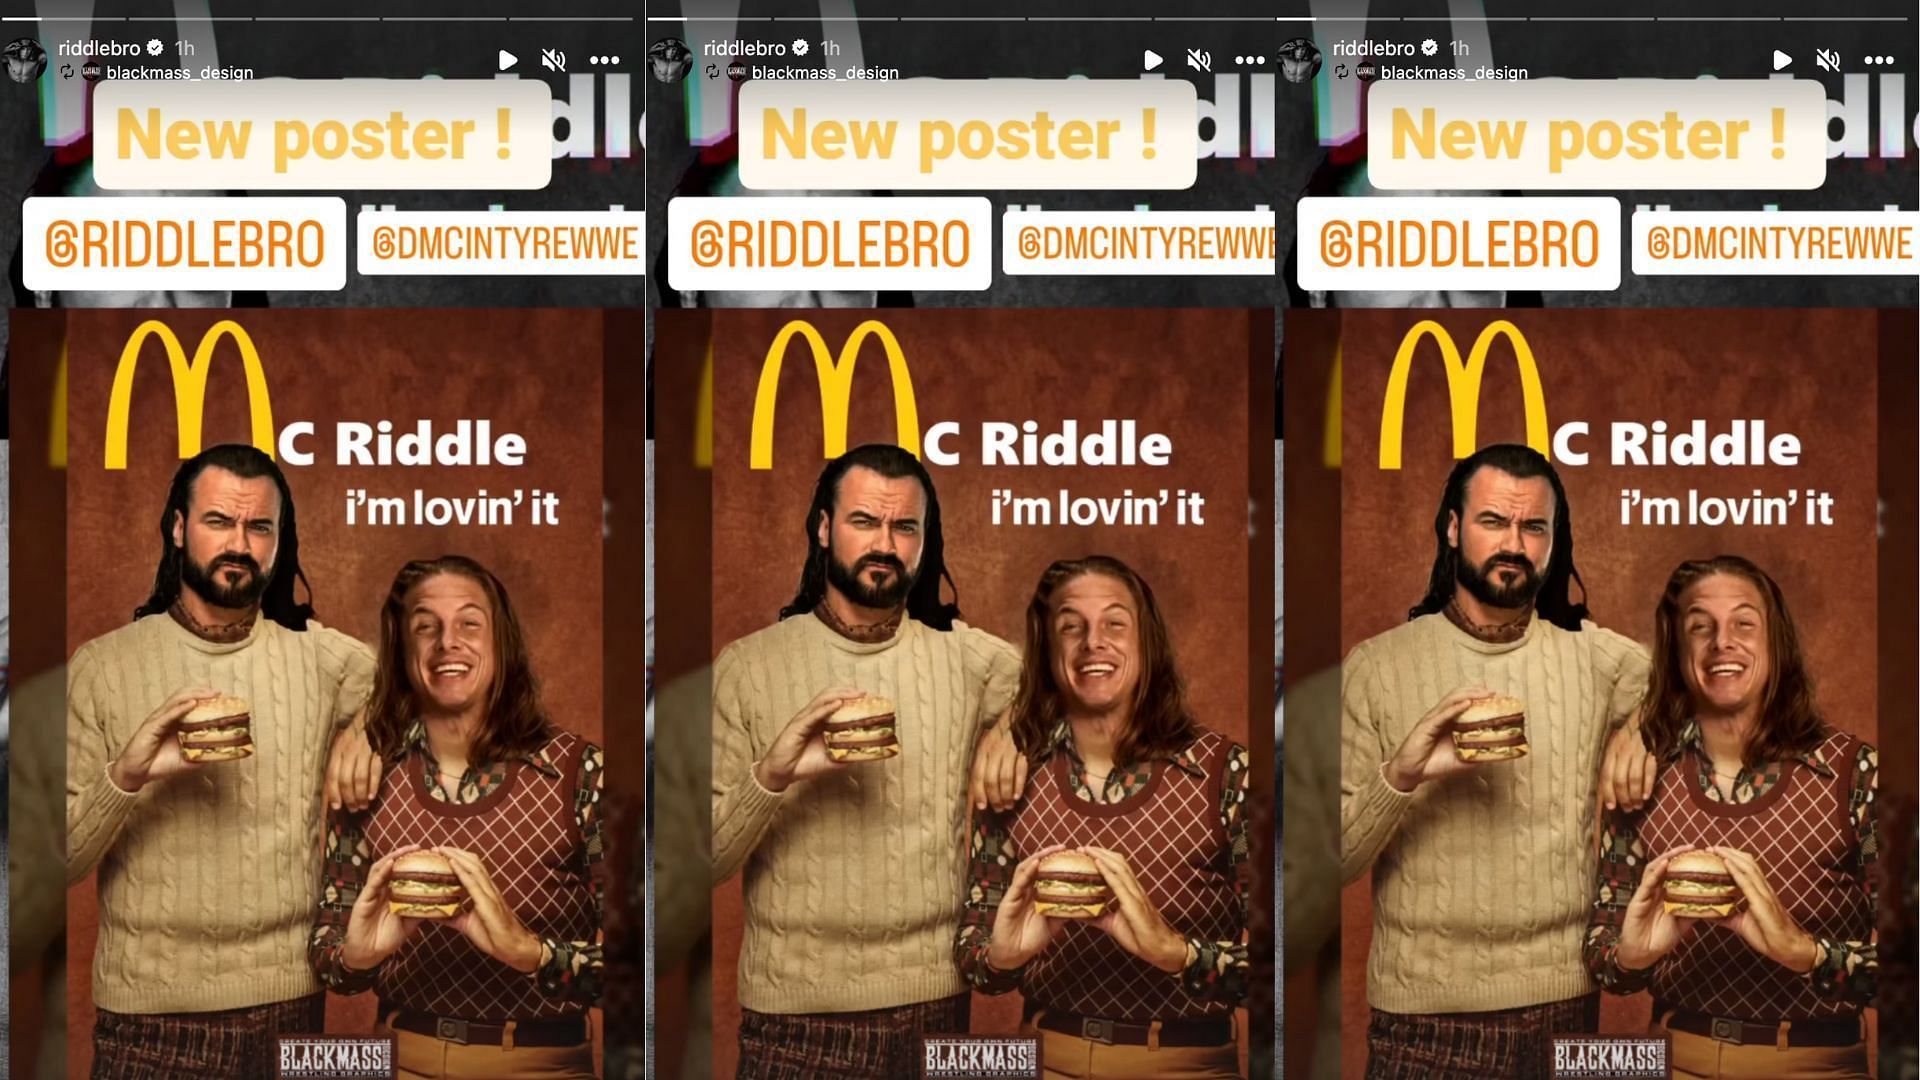 Riddle reveals hilarious poster.